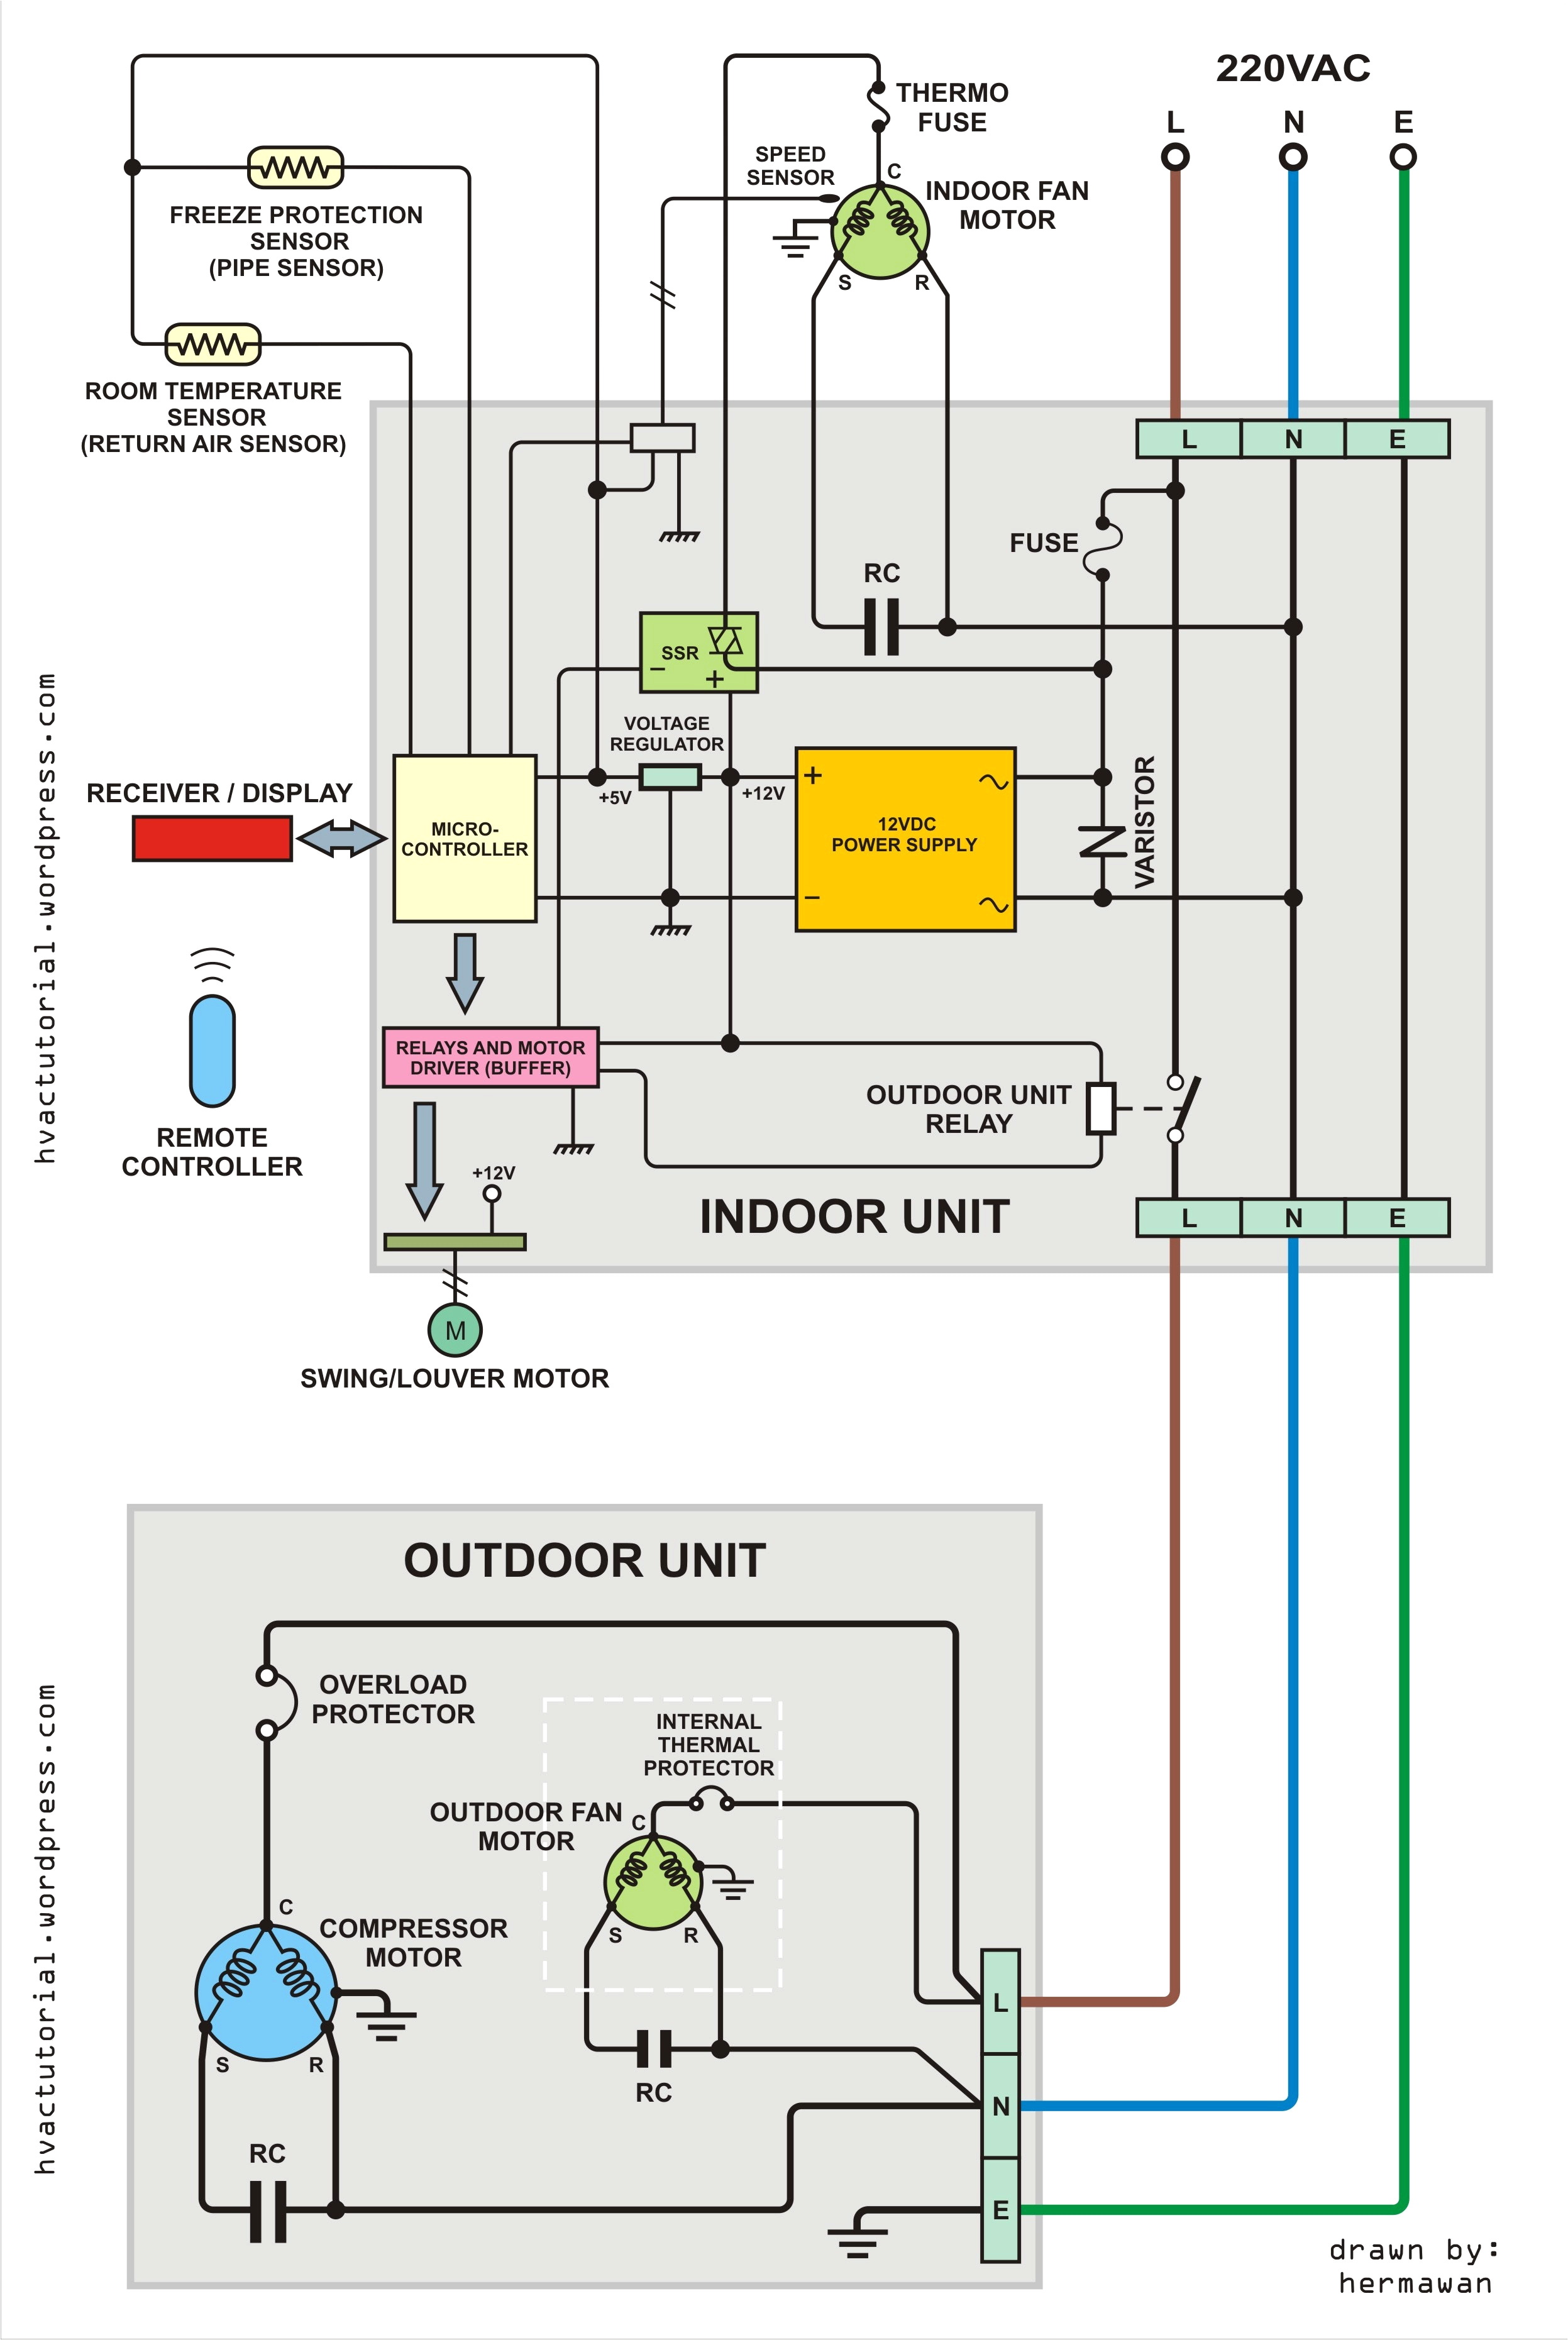 air conditioning diagram air conditioning diagram wiring diagram today ductable split ac wiring diagram house air